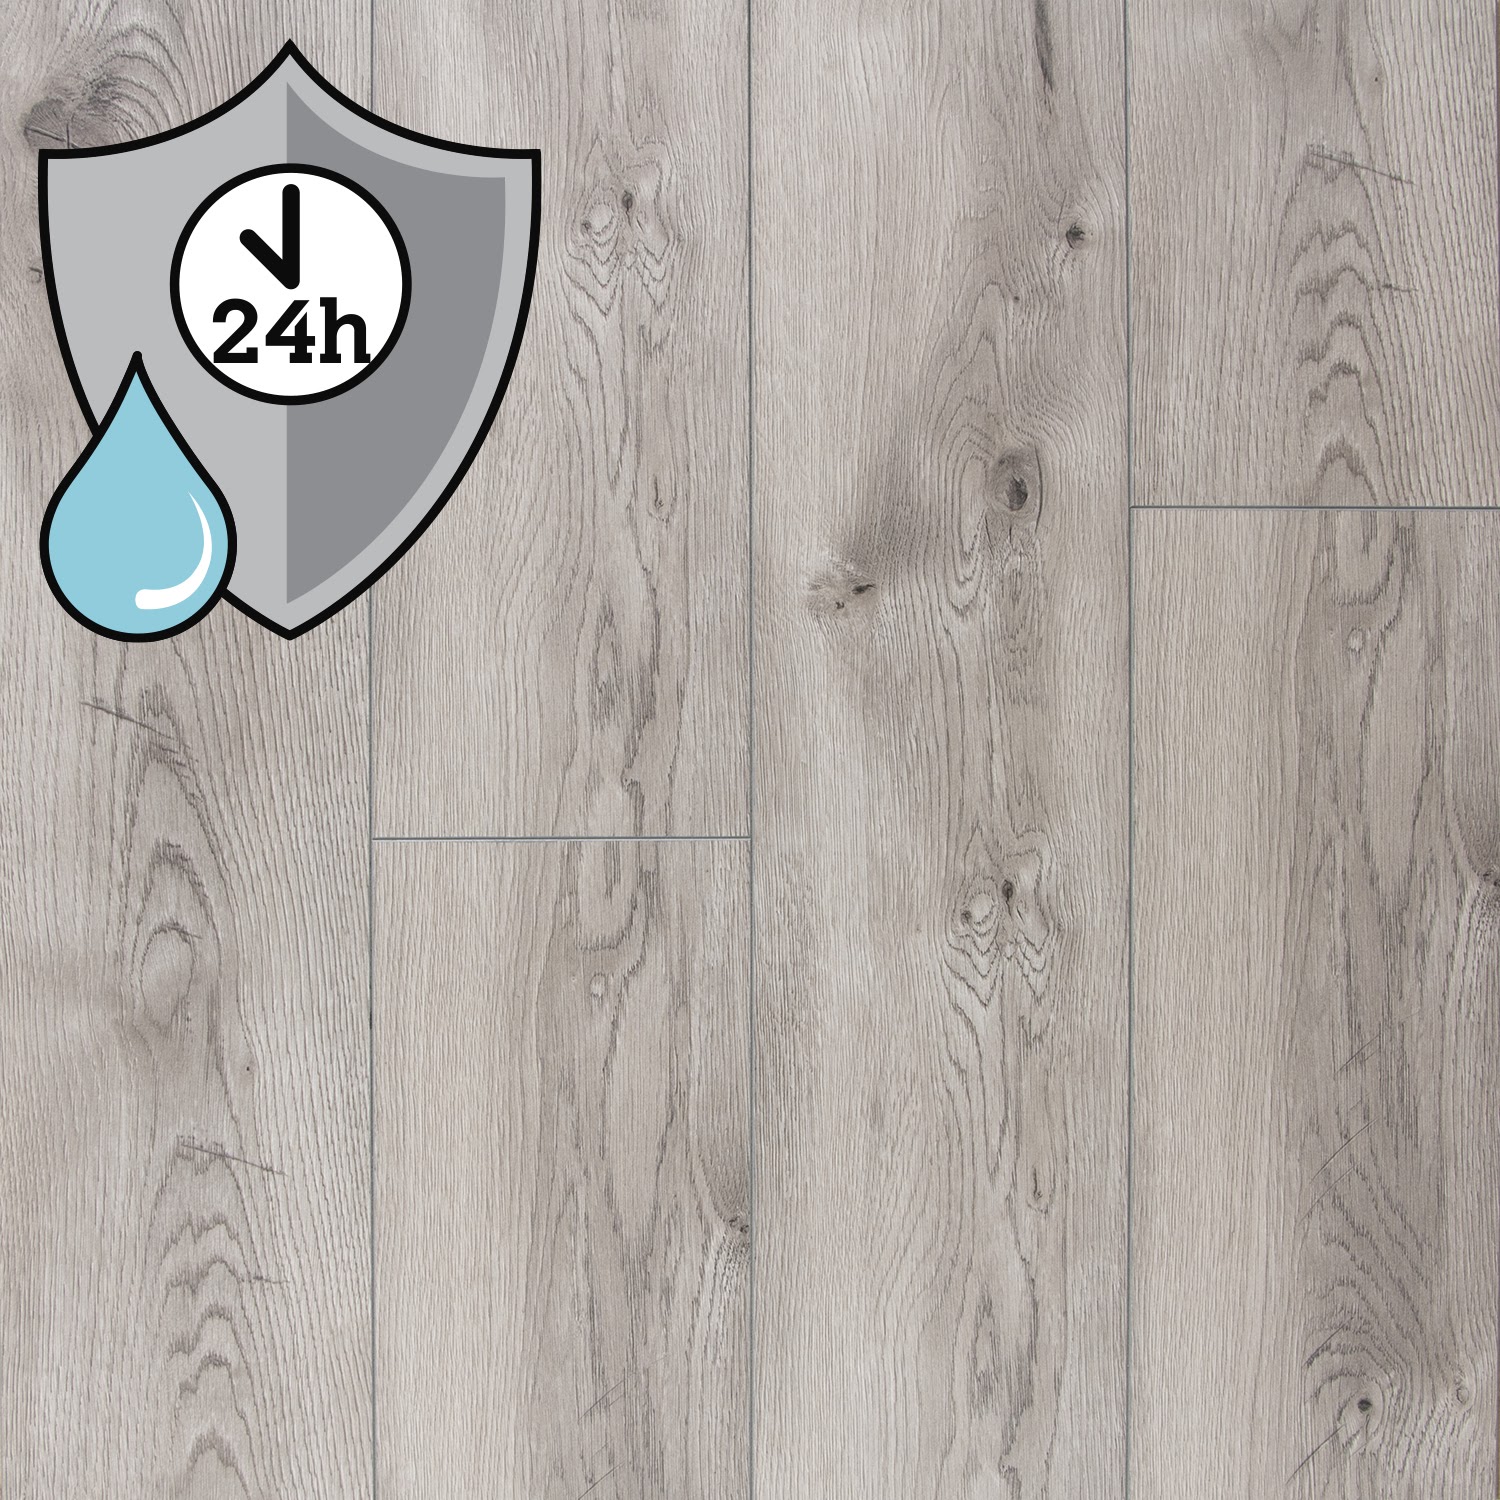 How to Effortlessly Maintain Water Resistant Laminate Flooring